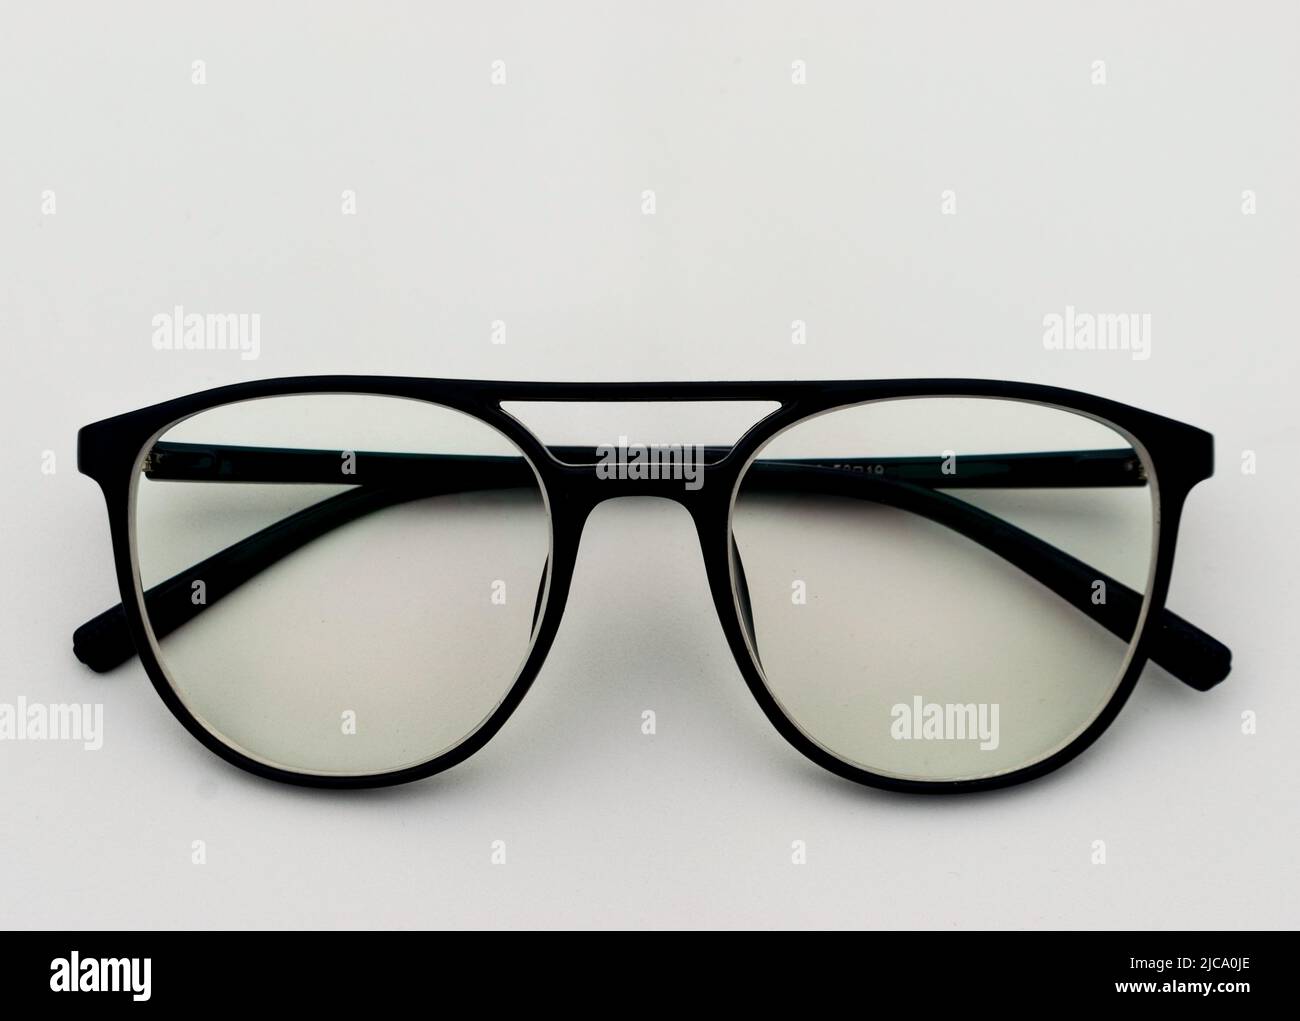 black frame anti-scratching technology anti glare spectacles glasses made of acetate material on white background Stock Photo